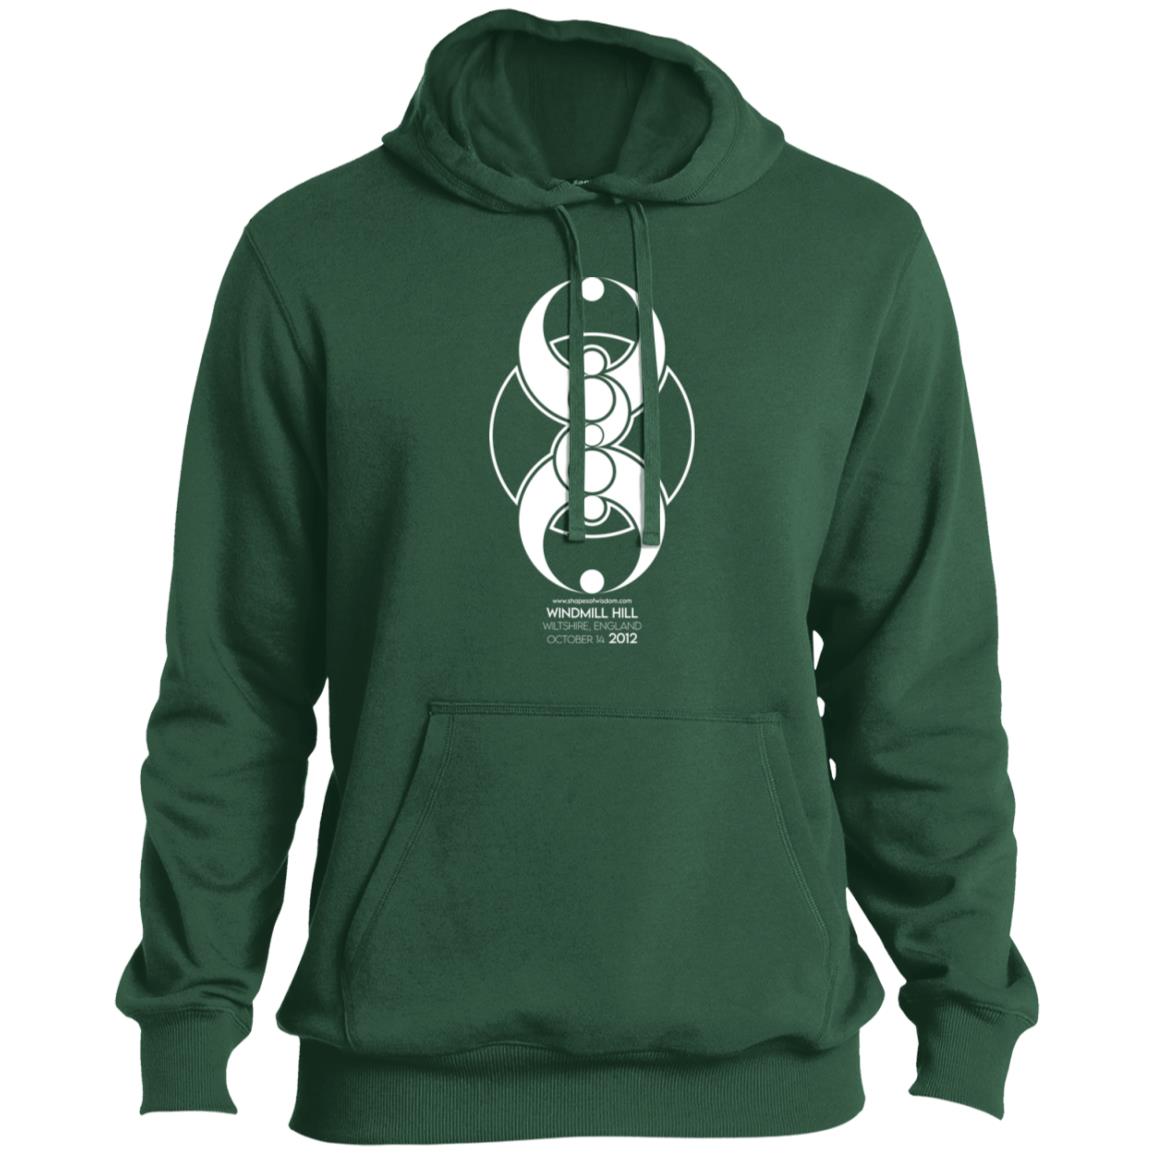 Crop Circle Pullover Hoodie - Windmill Hill 2